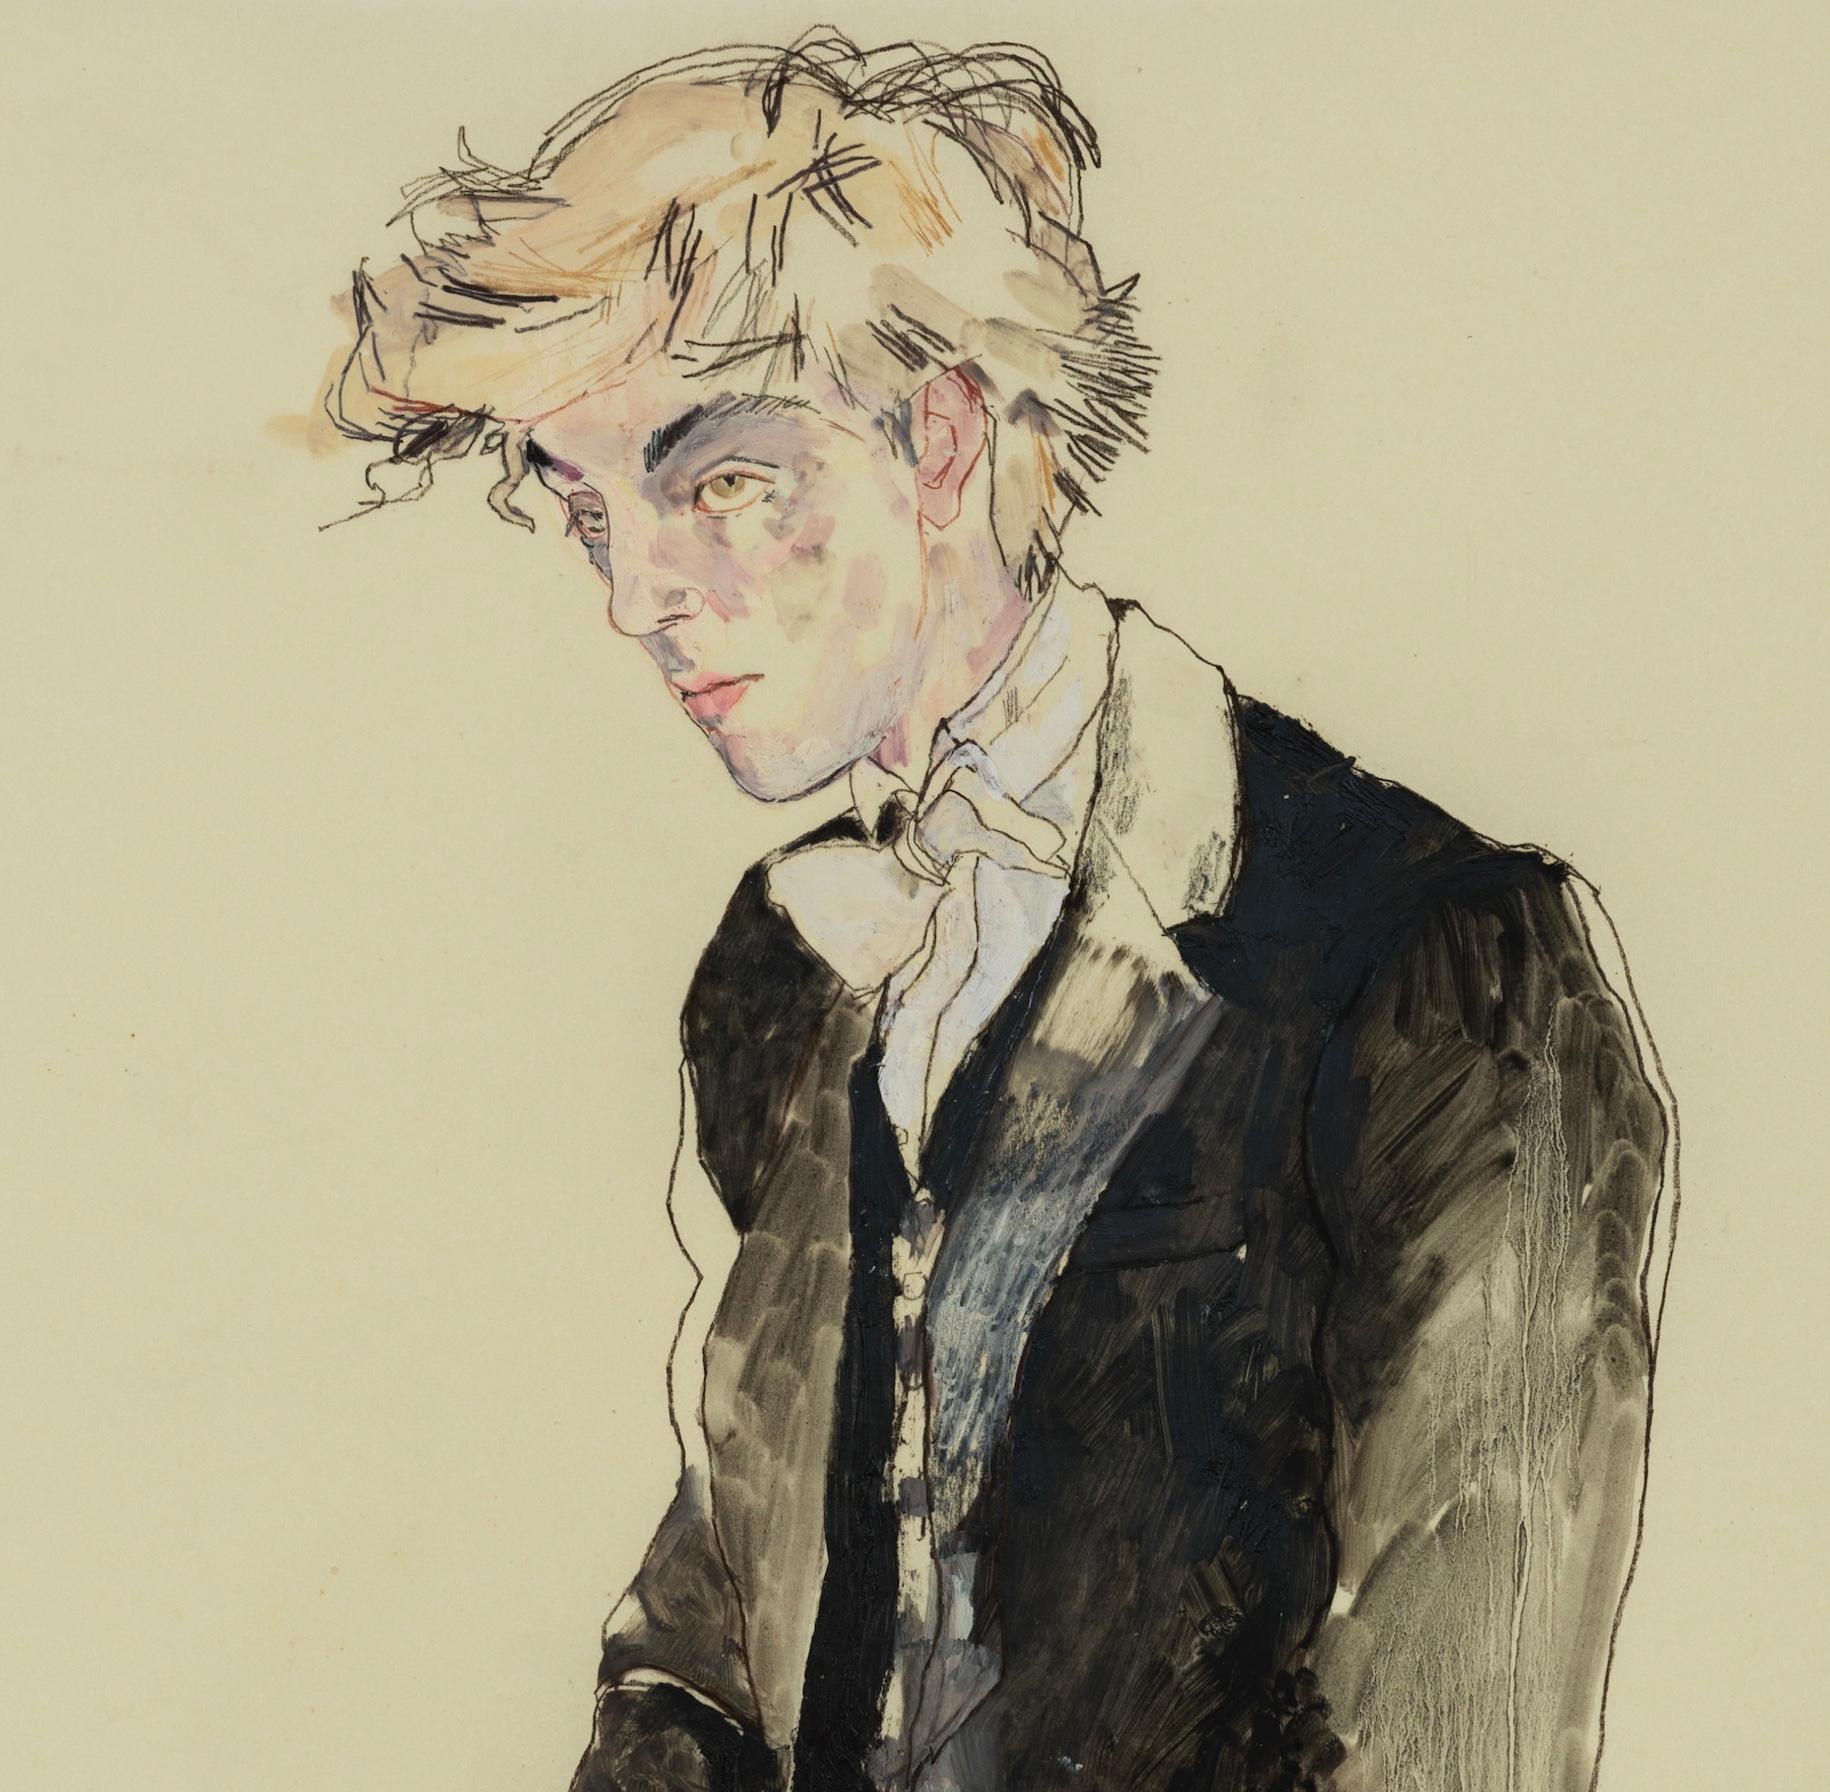 Eton Boy (Sitting), Mixed media on Pergamenata parchment - Contemporary Painting by Howard Tangye